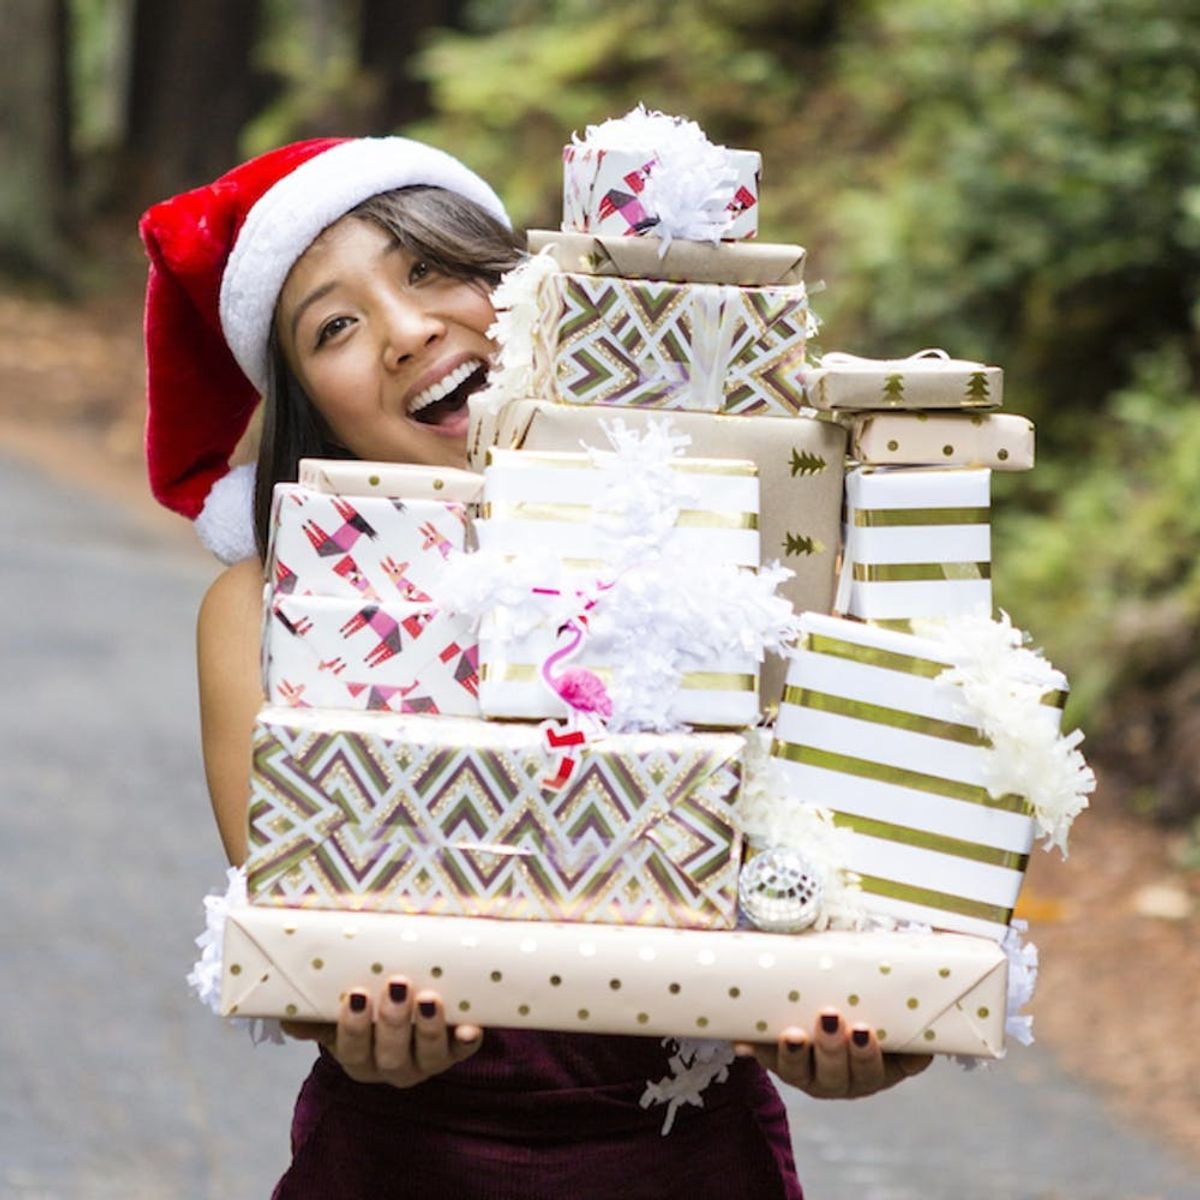 The Budgeting Secret That Will Keep You from Overspending This Holiday Season